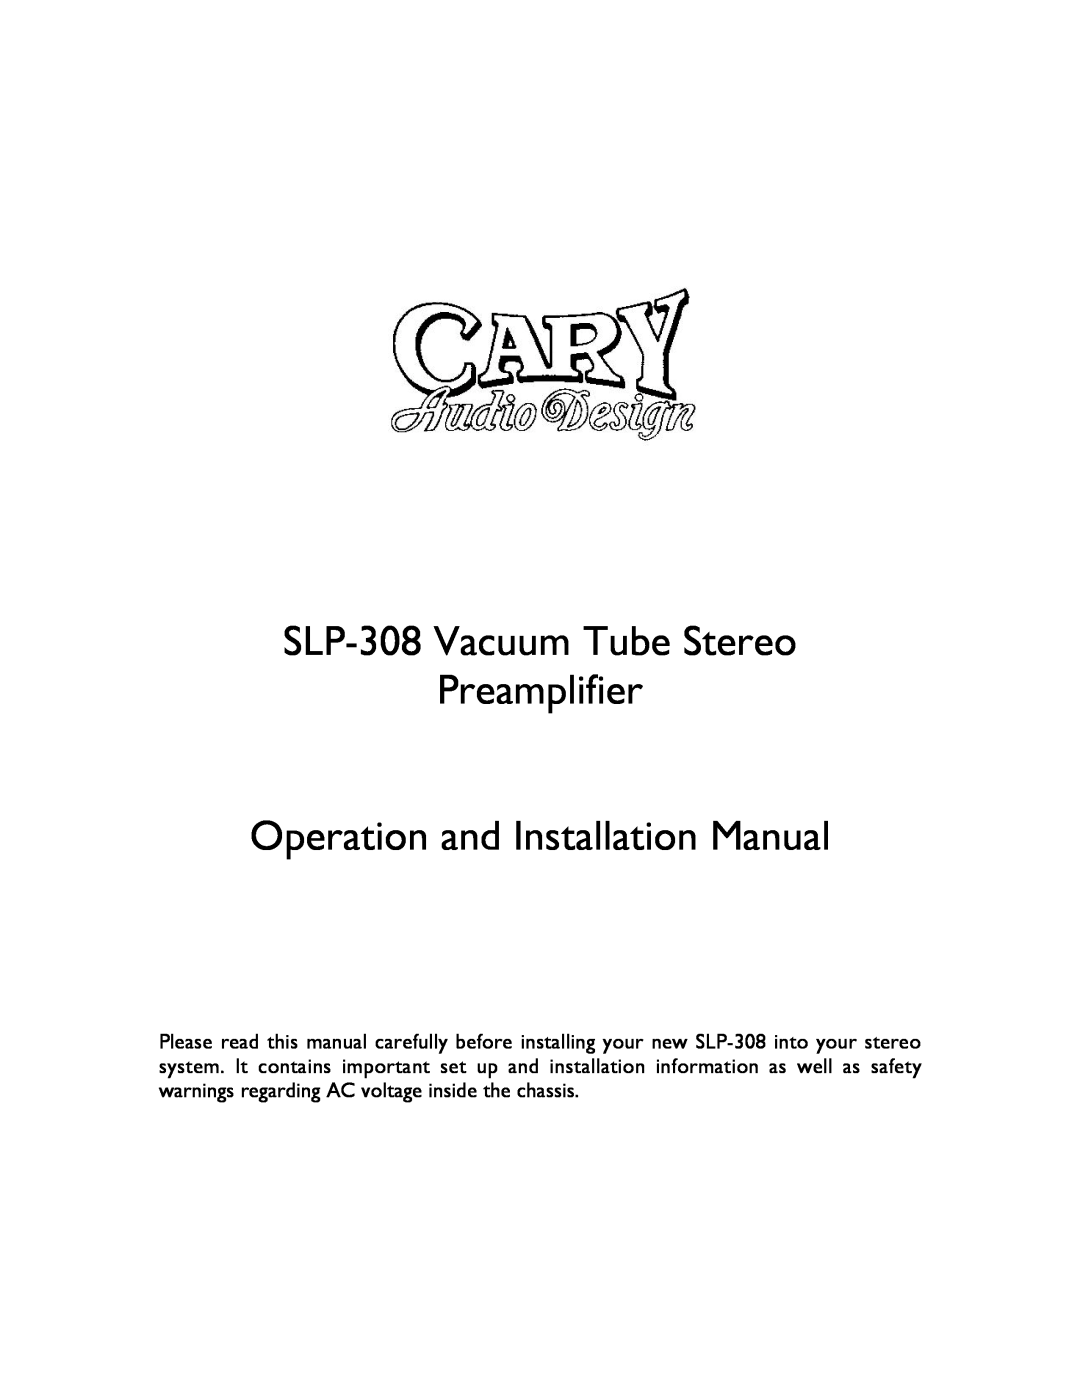 Cary Audio Design installation manual SLP-308Vacuum Tube Stereo Preamplifier, Operation and Installation Manual 